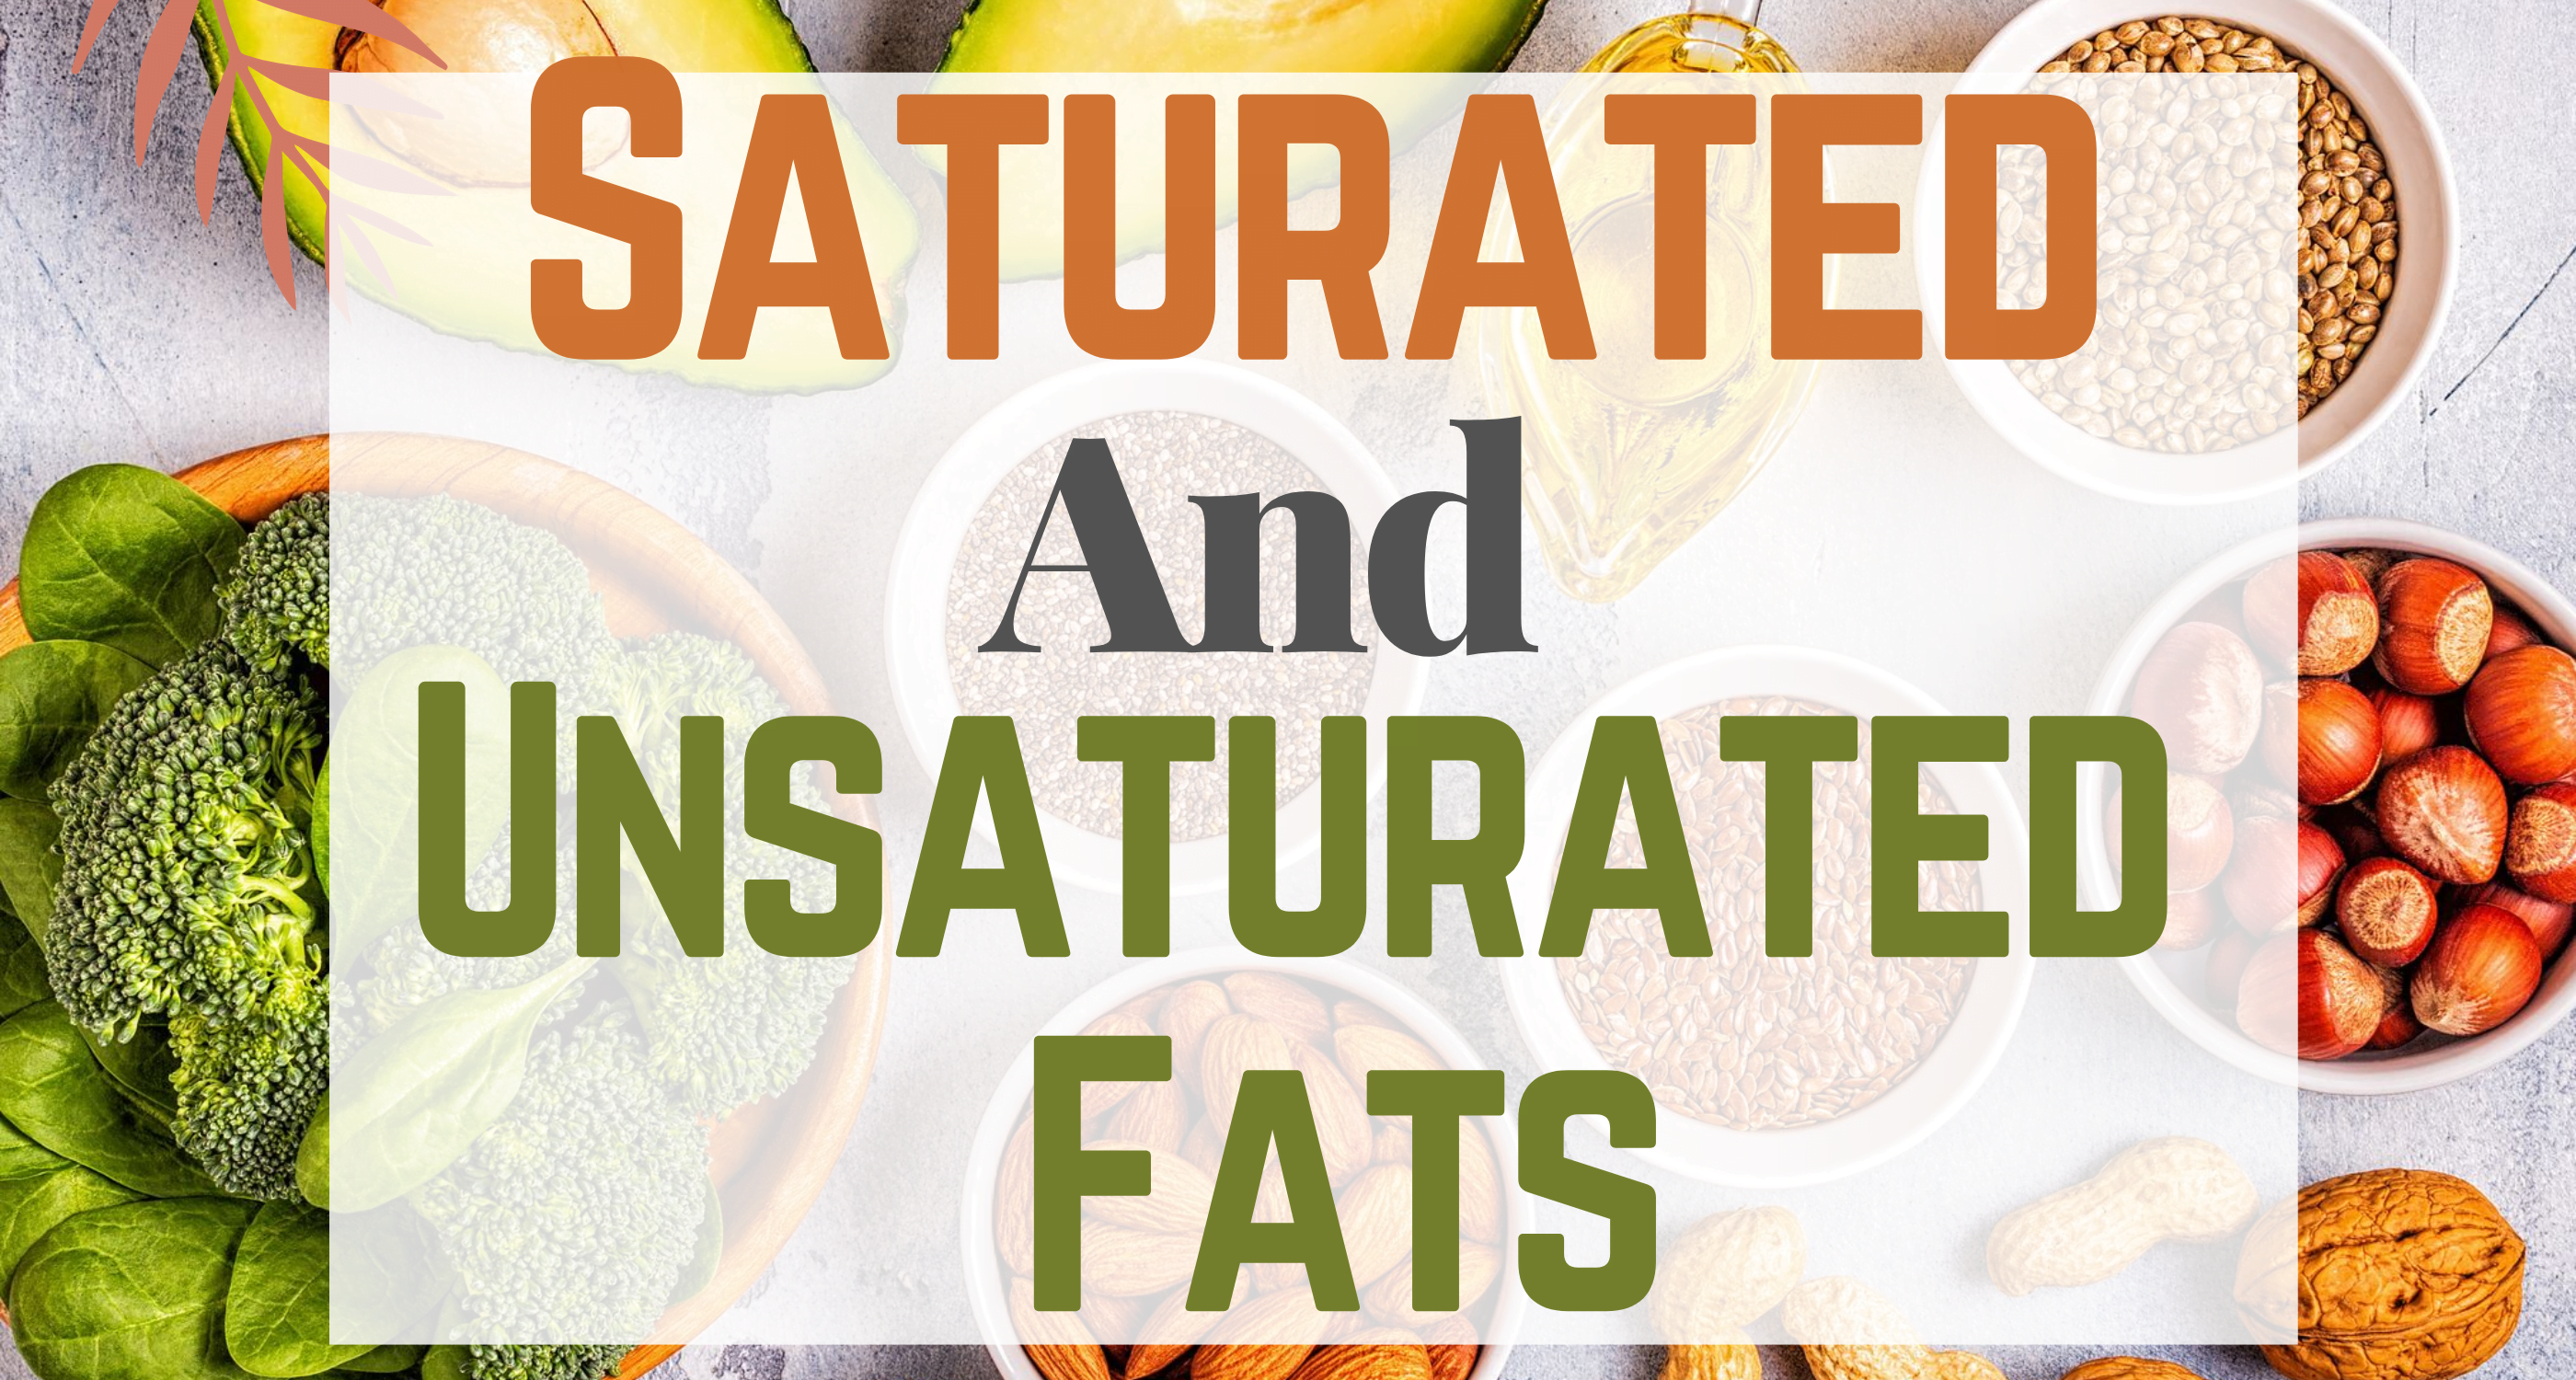 Saturated and Unsaturated fats